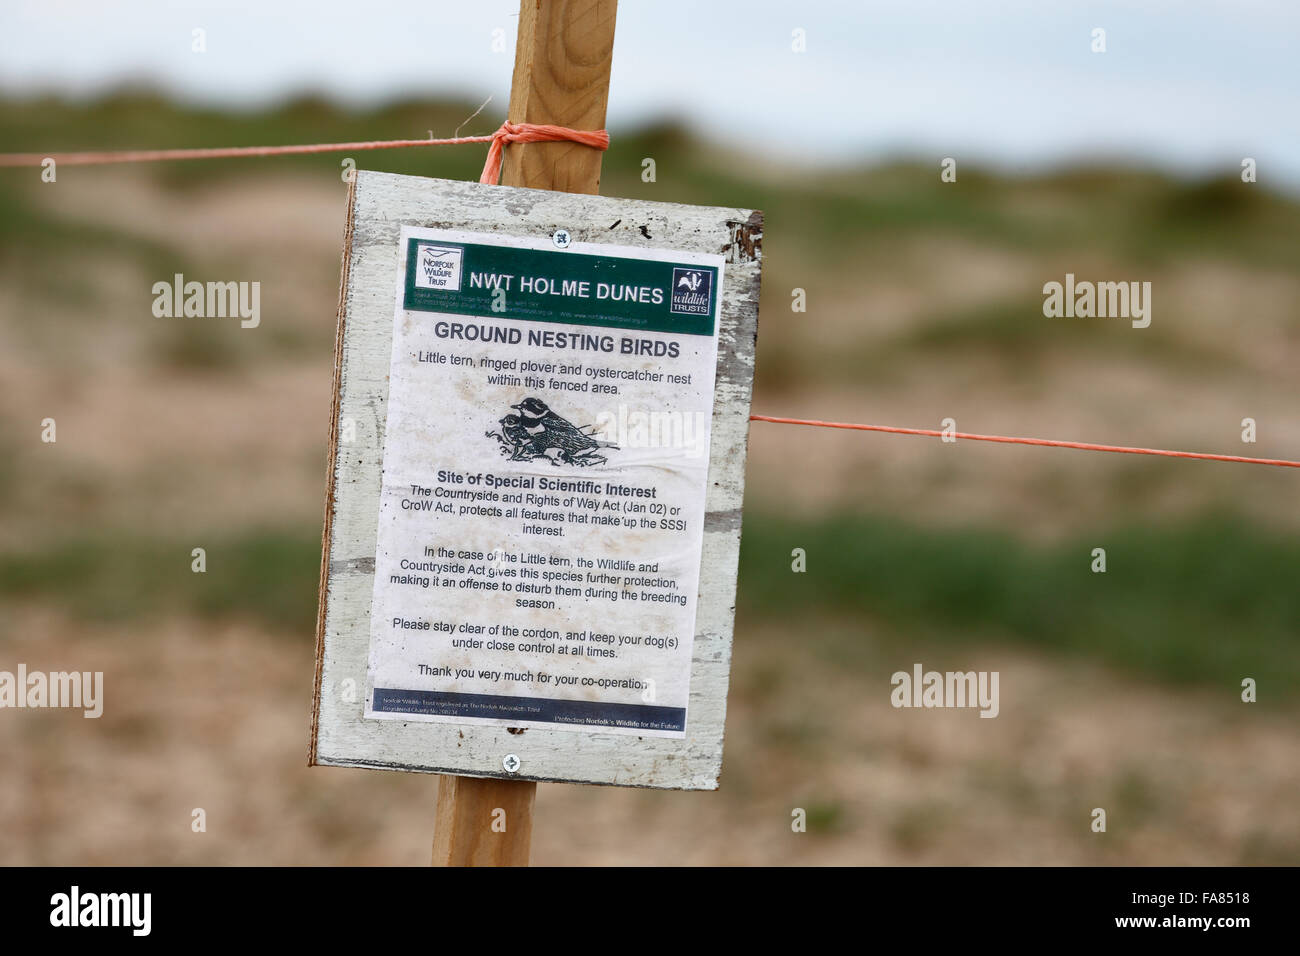 Warning sign at Holme Dunes Nature Reserve in Norfolk warning of the presence of ground nesting birds and to keep away. Stock Photo